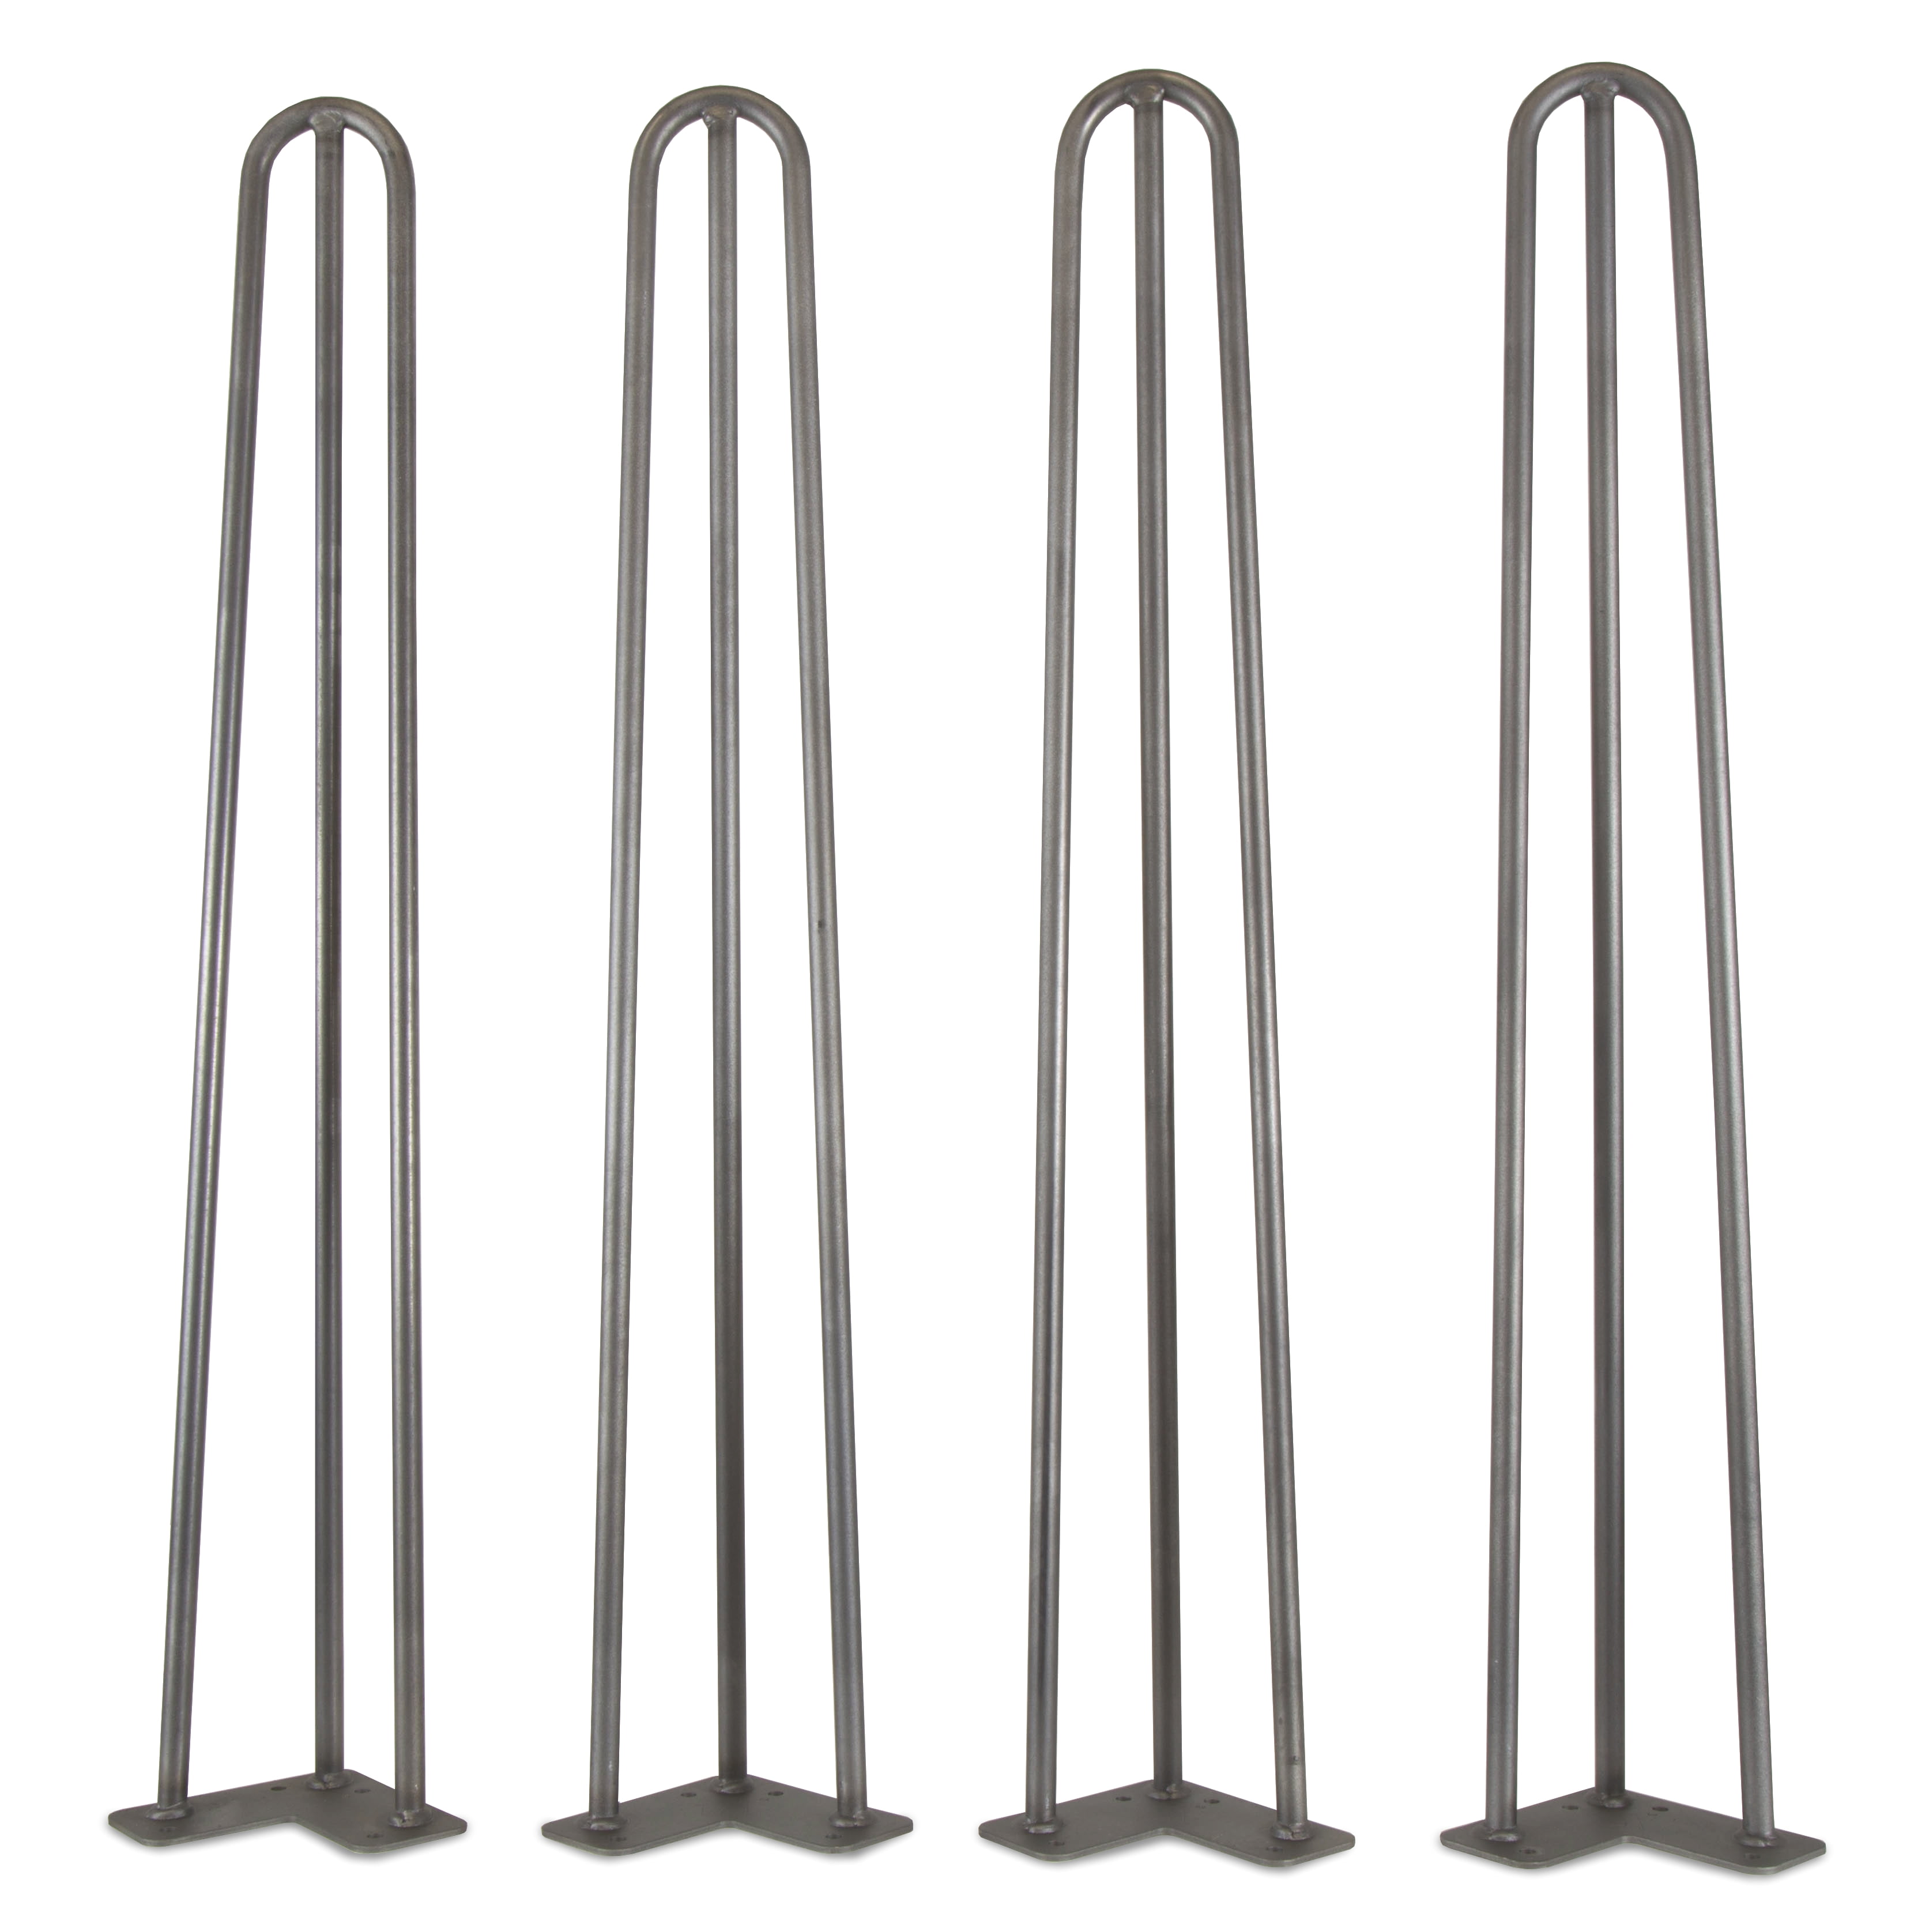 Adjusts from 28 5/8" 2 3/8" Diameter Chrome Legs for 30" Table or Desk 29 